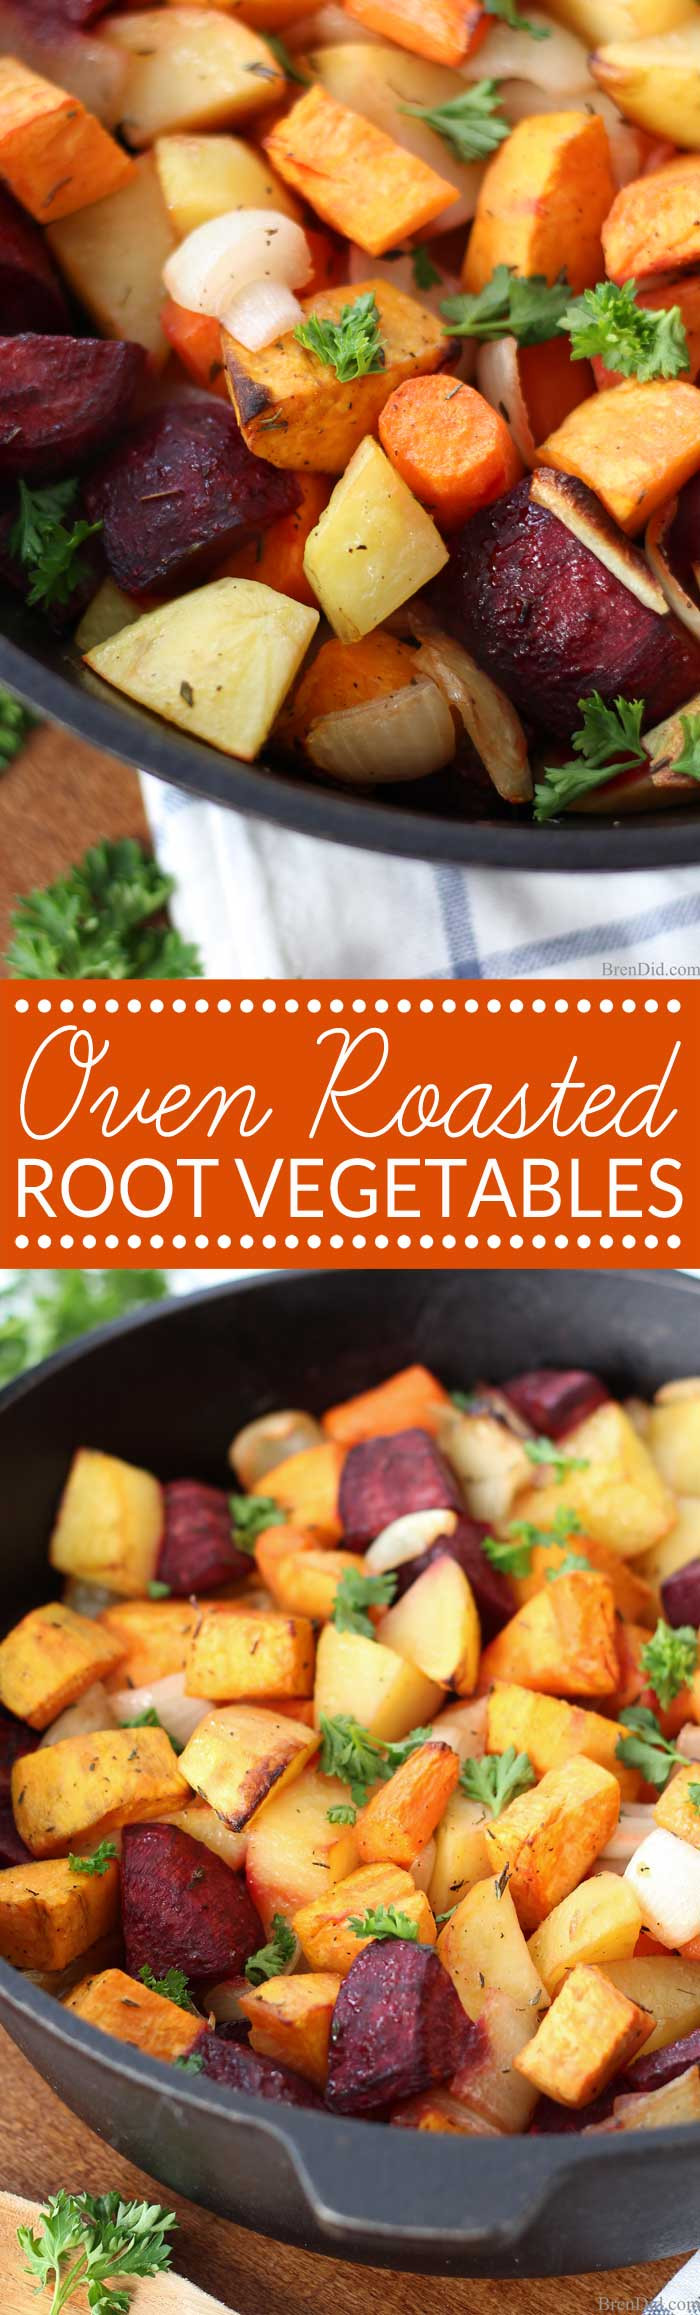 Roasted Vegetables Thanksgiving Recipe
 Oven Roasted Root Ve ables Bren Did